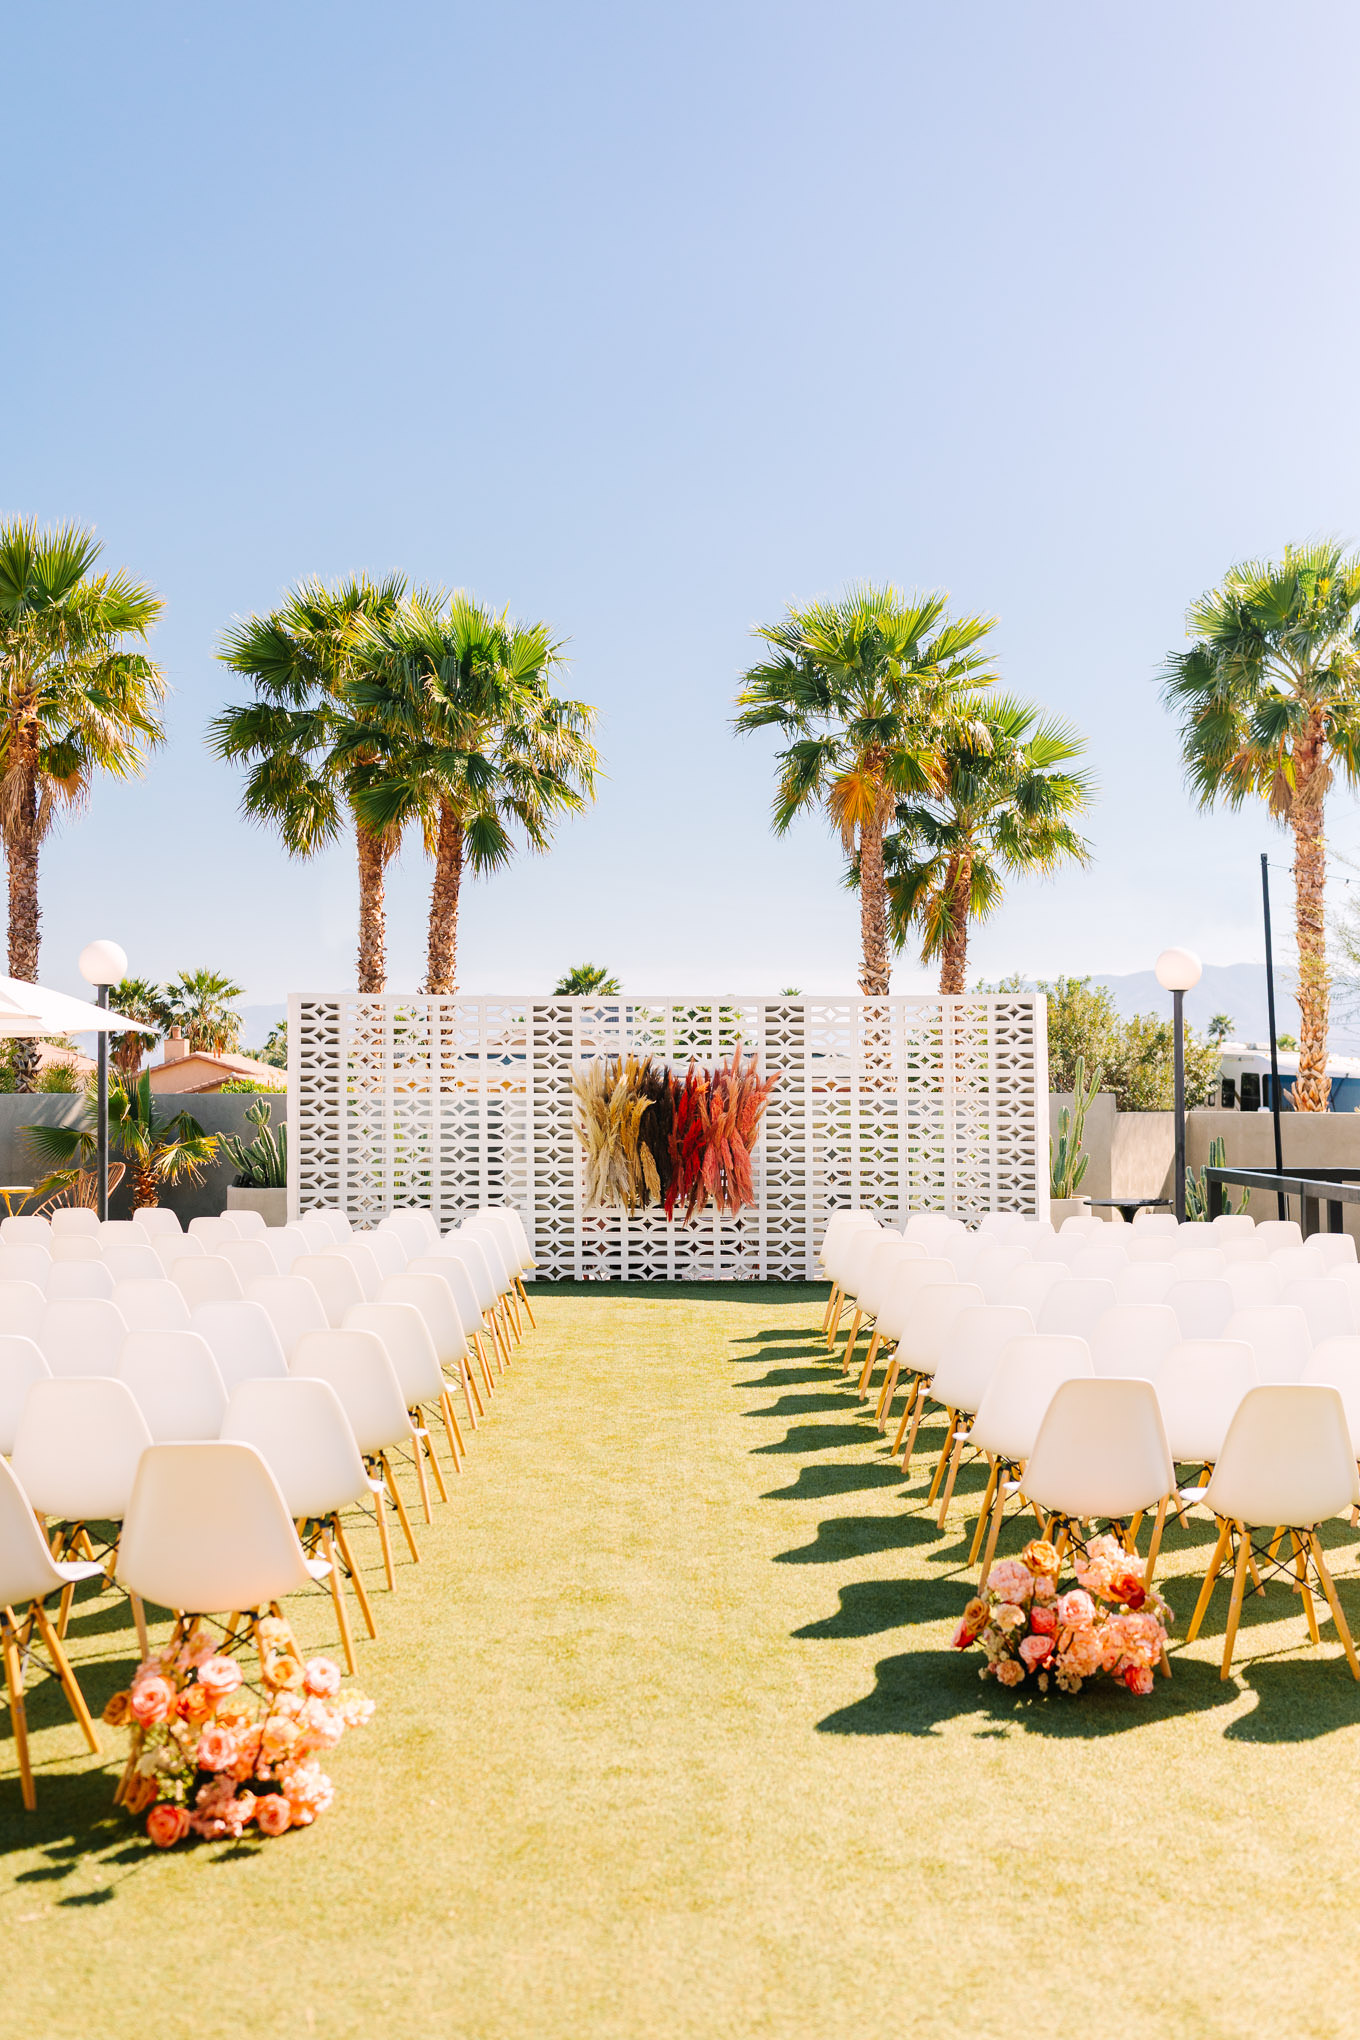 Wedding at The Lautner Compound in Palm Springs | Wedding and elopement photography roundup | Los Angeles and Palm Springs photographer | #losangeleswedding #palmspringswedding #elopementphotographer Source: Mary Costa Photography | Los Angeles